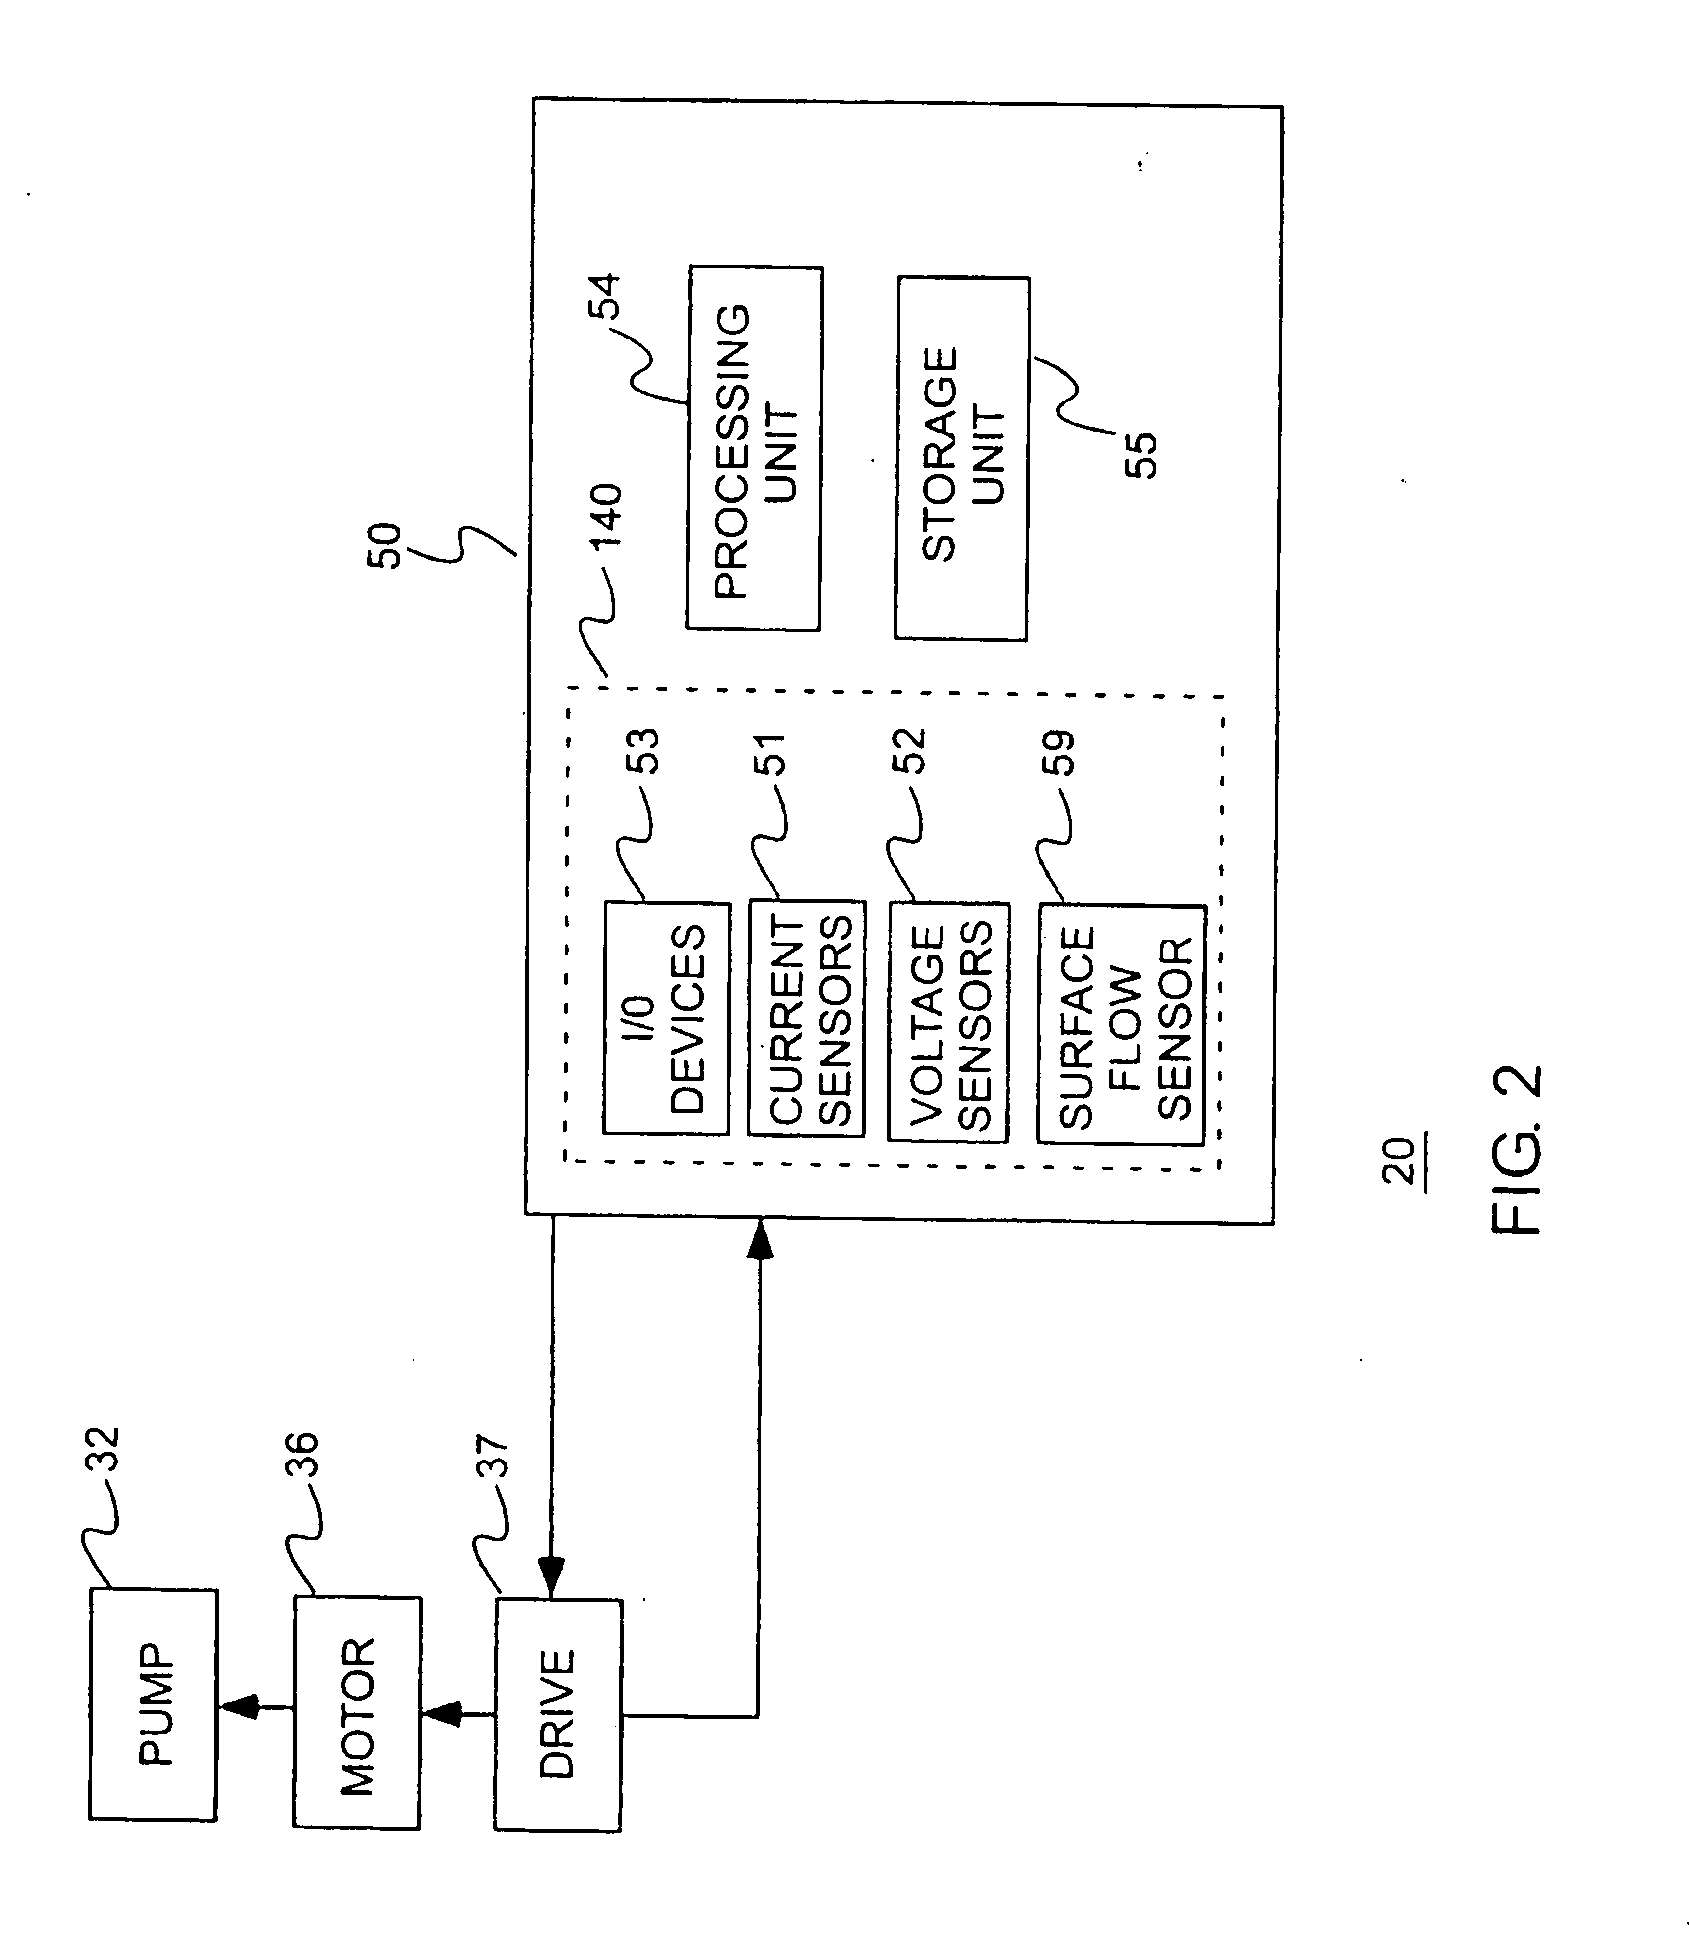 Determination And Control Of Wellbore Fluid Level, Output Flow, And Desired Pump Operating Speed, Using A Control System For A Centrifugal Pump Disposed Within The Wellbore